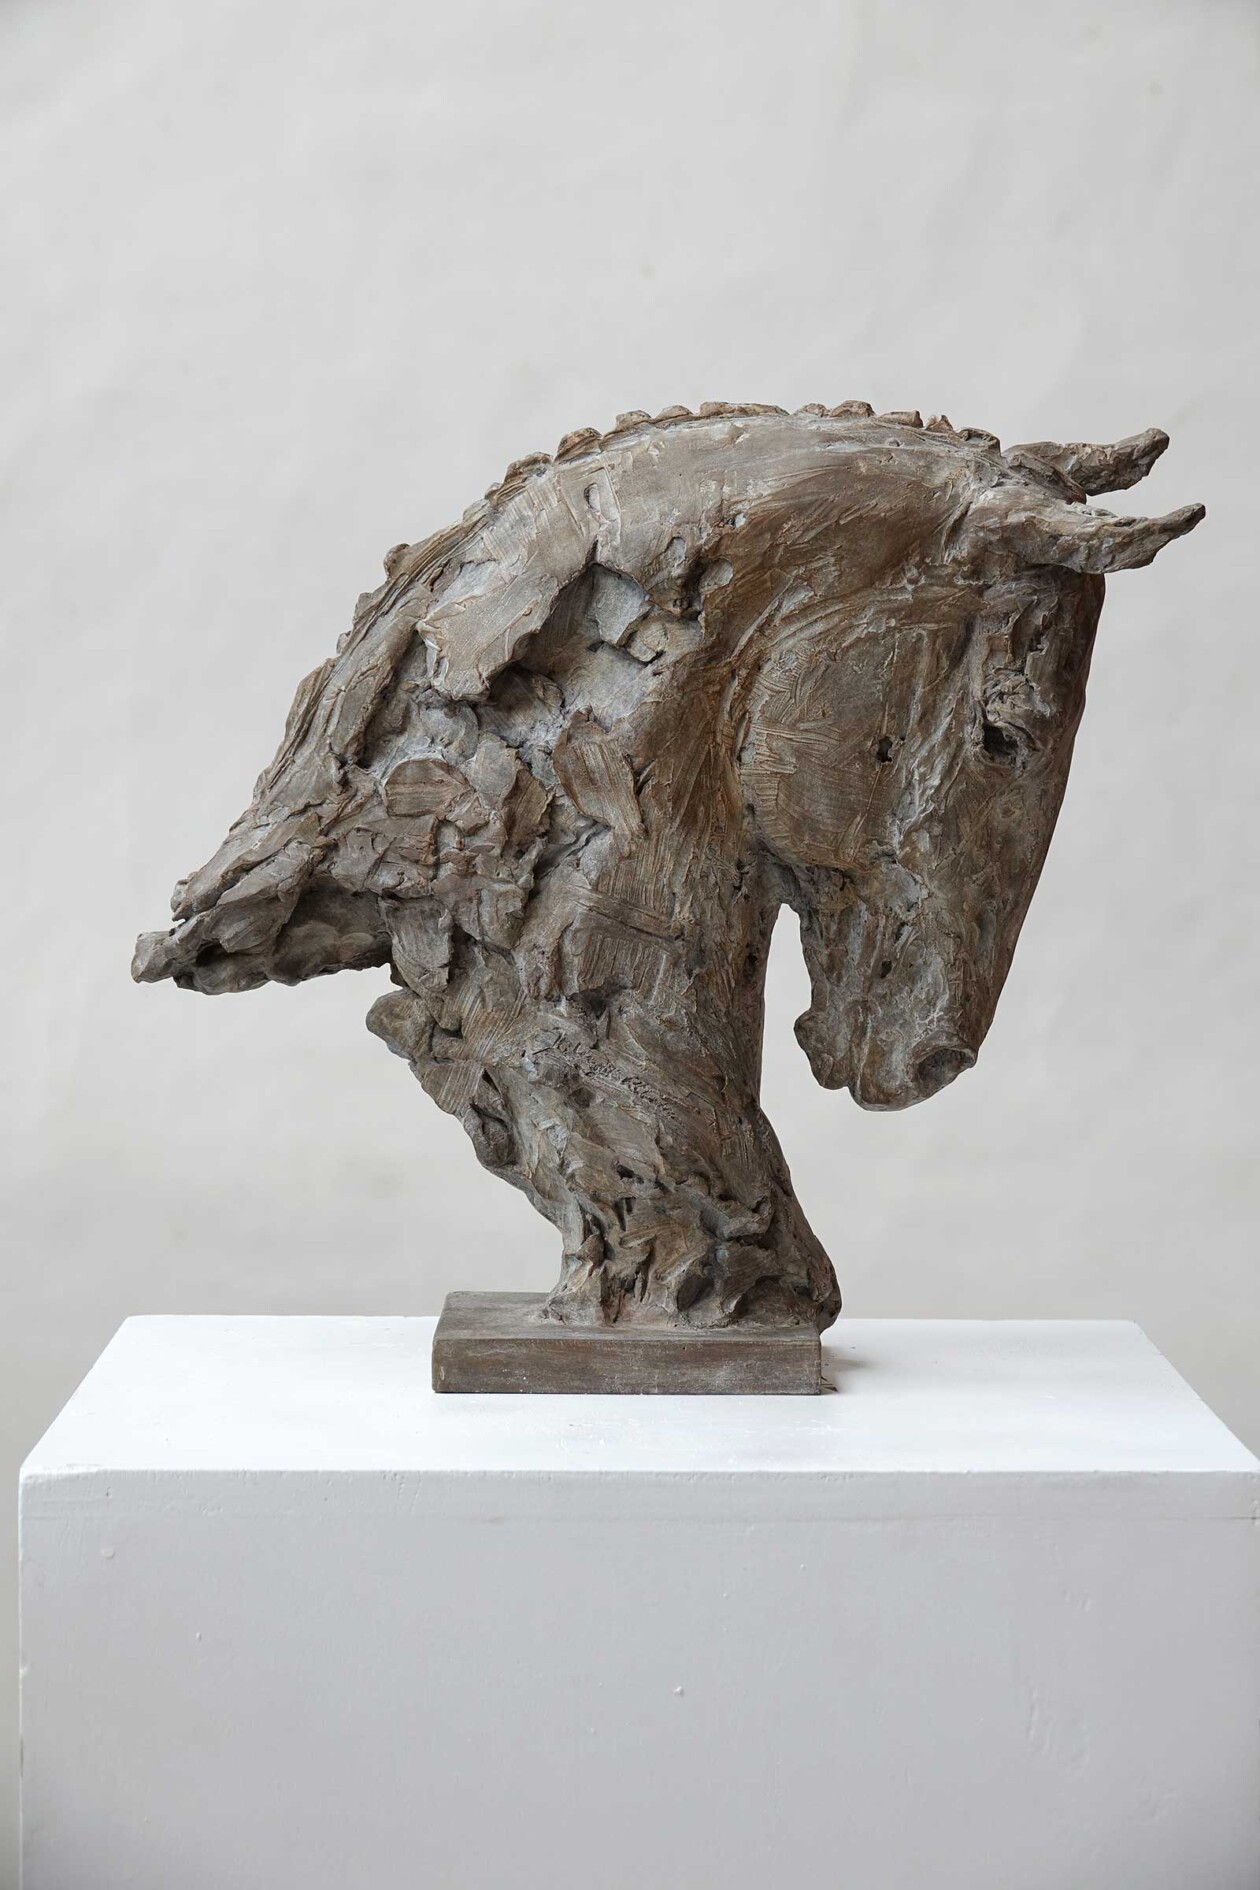 Jürgen Lingl Hand Carves Precise And Textured Figurative Sculptures From Wood (7)